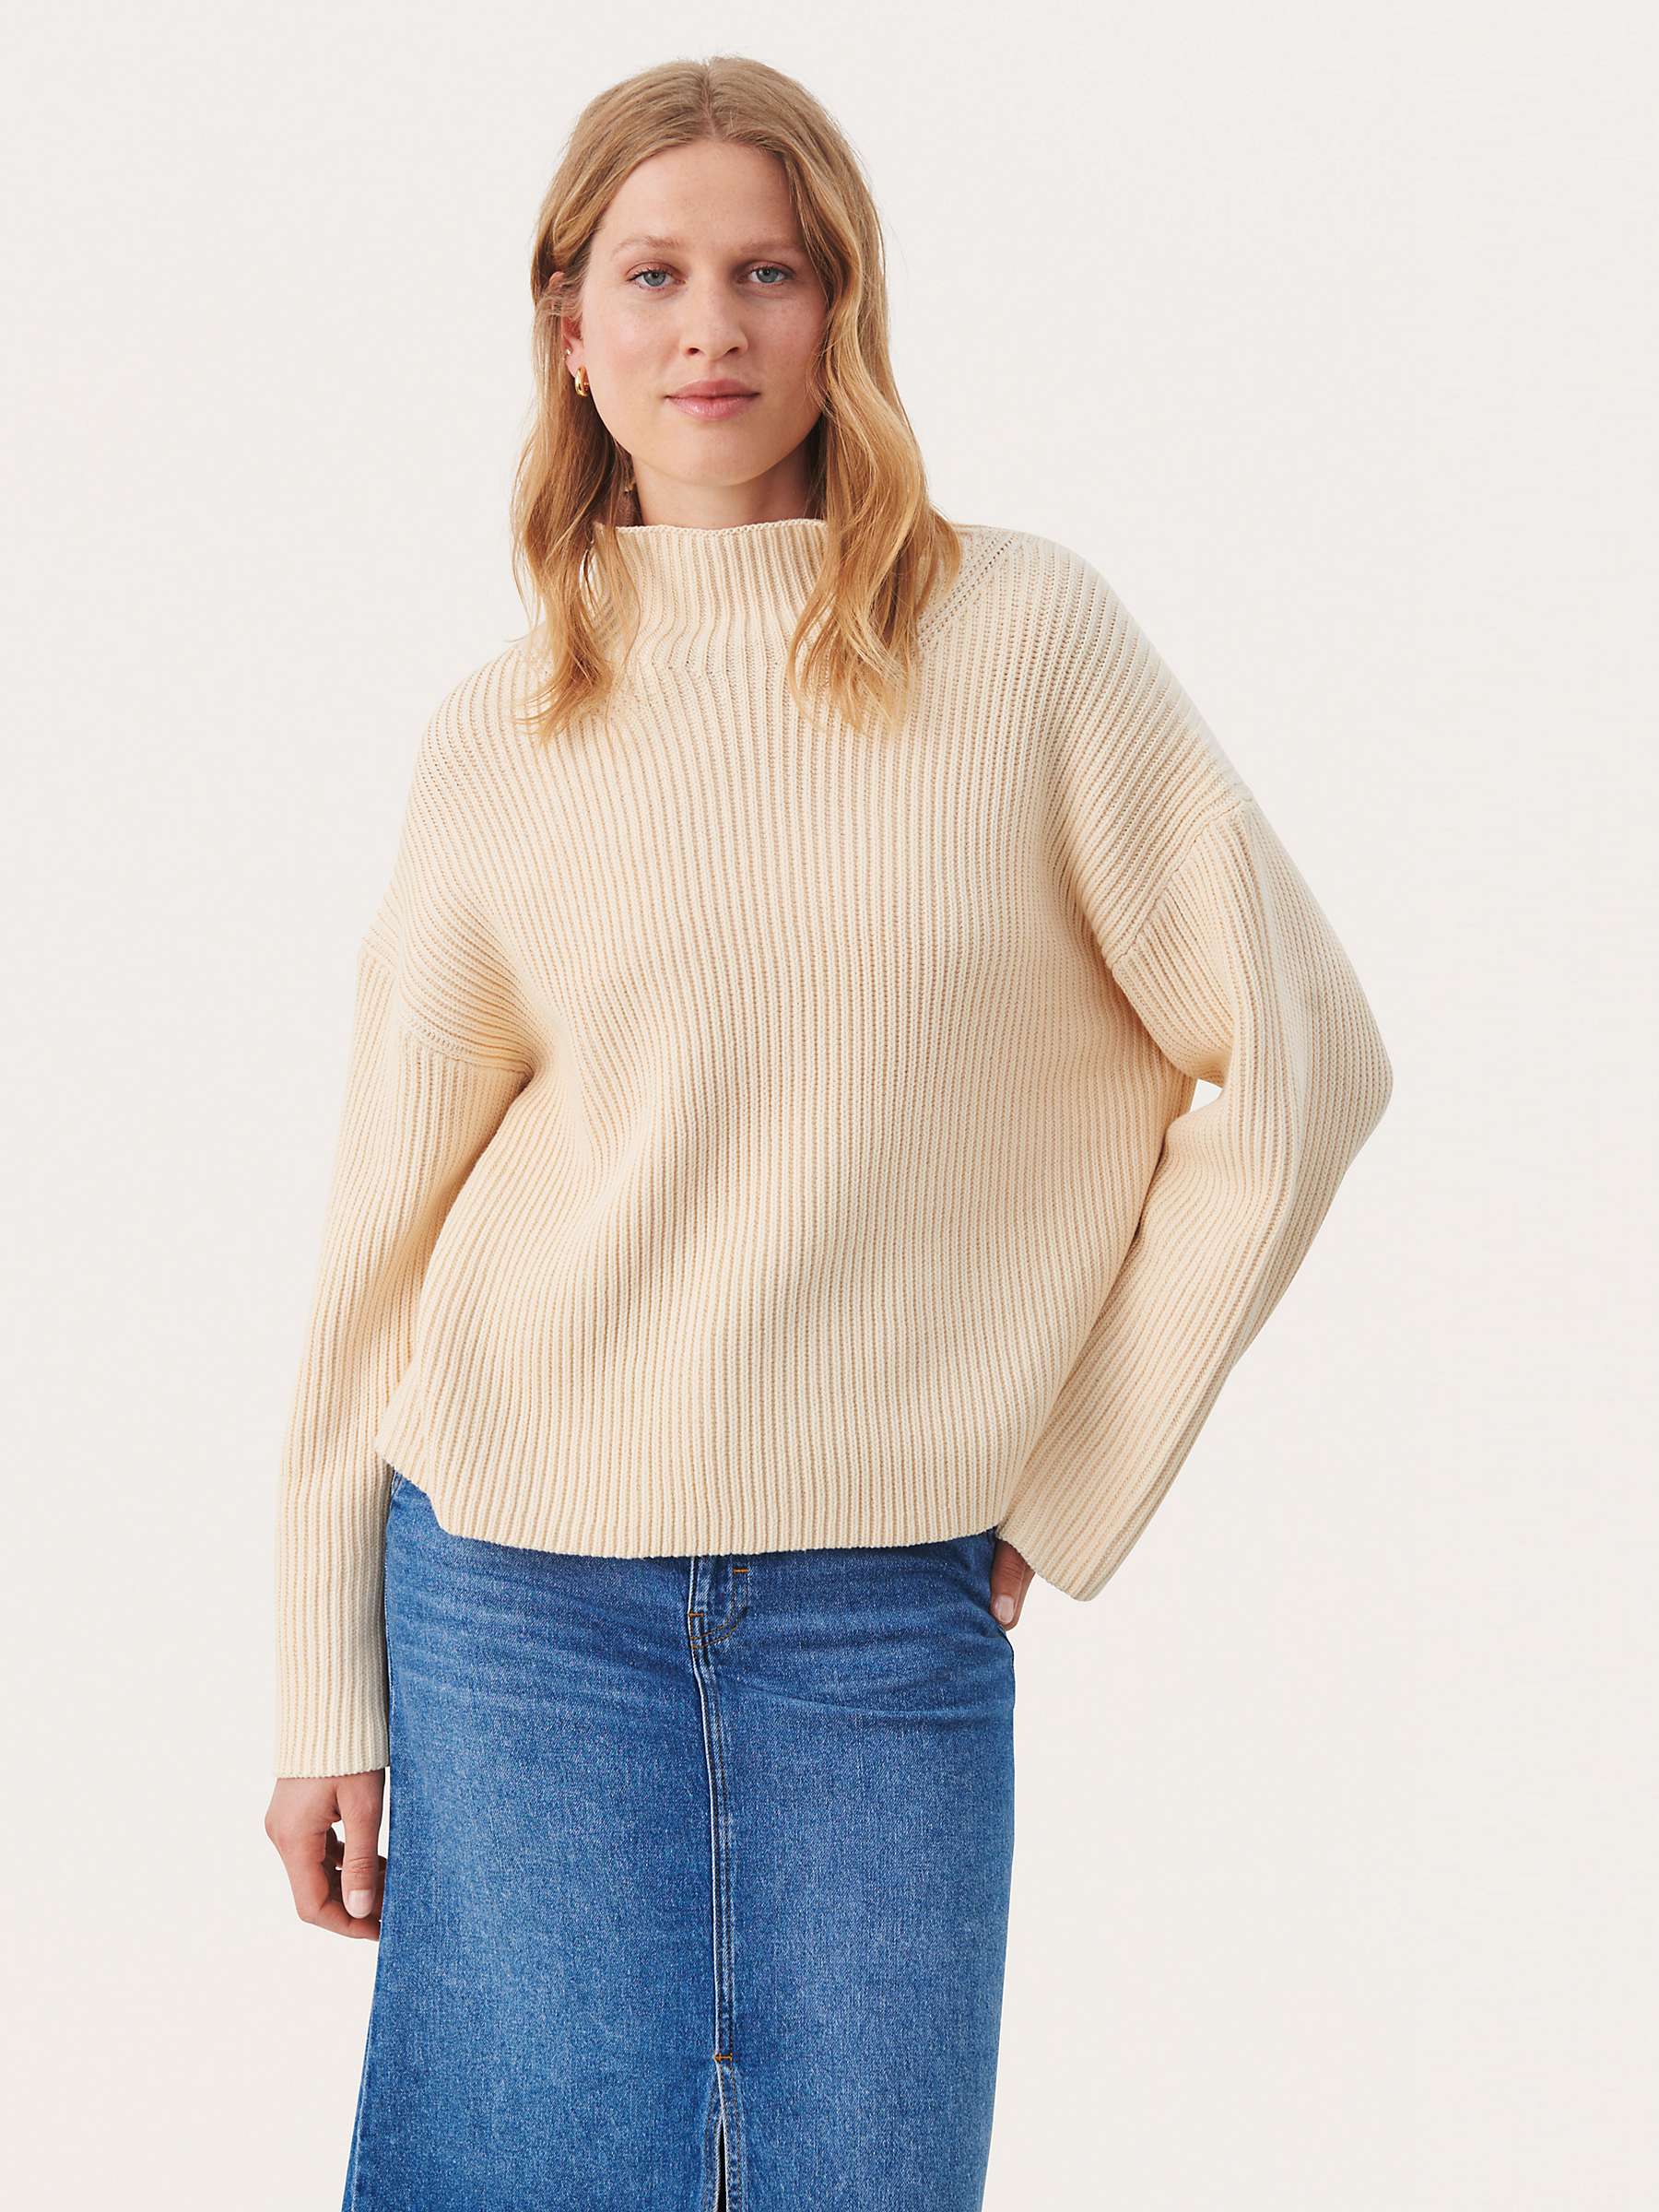 Buy Part Two Angeline Rib Knit Jumper Online at johnlewis.com